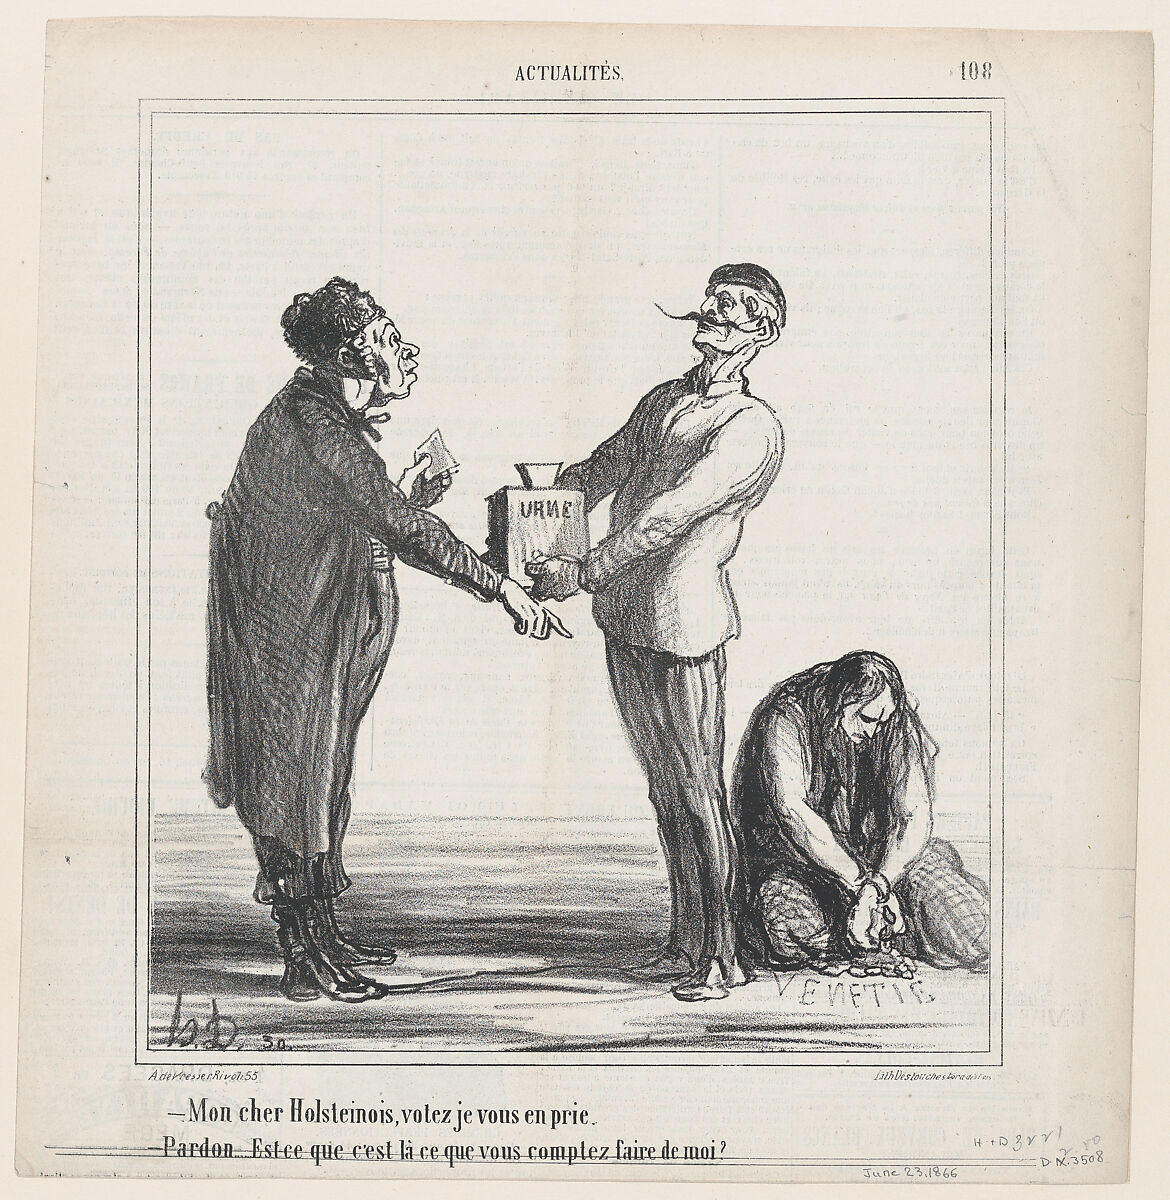 –My dear Holsteiner, I urge you to vote. –Pardon me, but am I going to end the same way as this one?, from 'News of the day,' published in Le Charivari, June 23, 1866, Honoré Daumier (French, Marseilles 1808–1879 Valmondois), Lithograph on newsprint; second state of two (Delteil) 